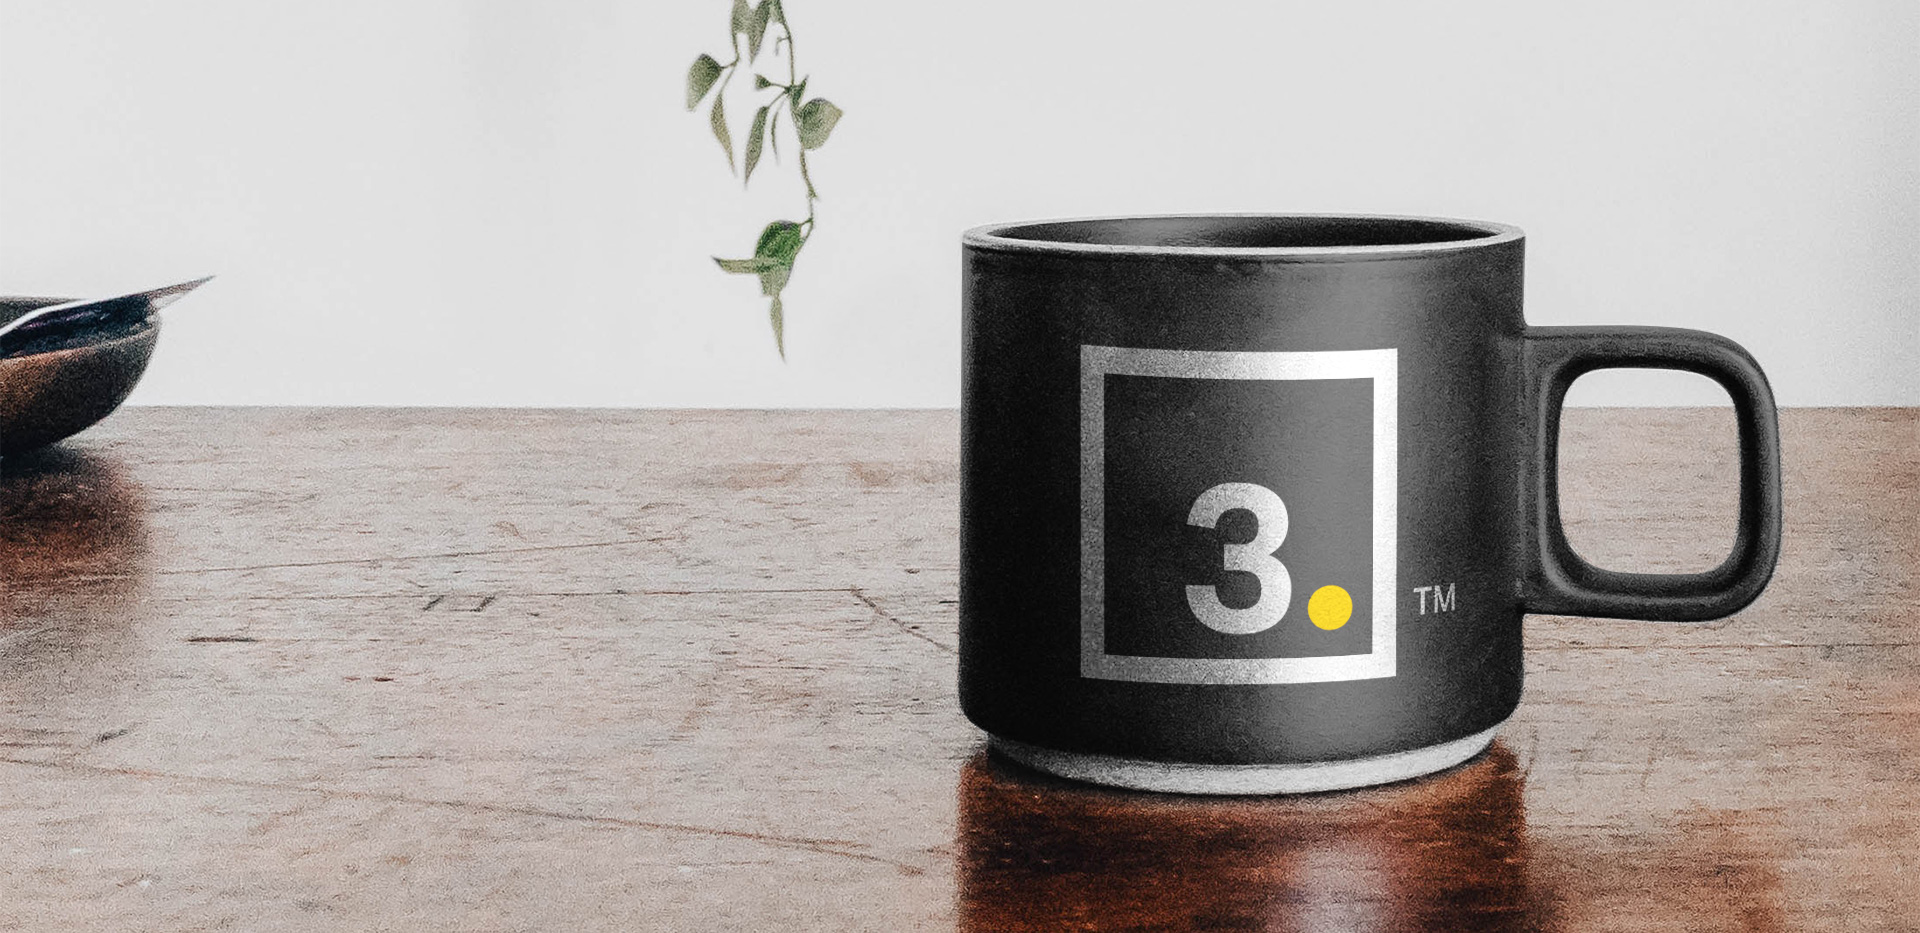 Third Space mug with a branded logo on a table.